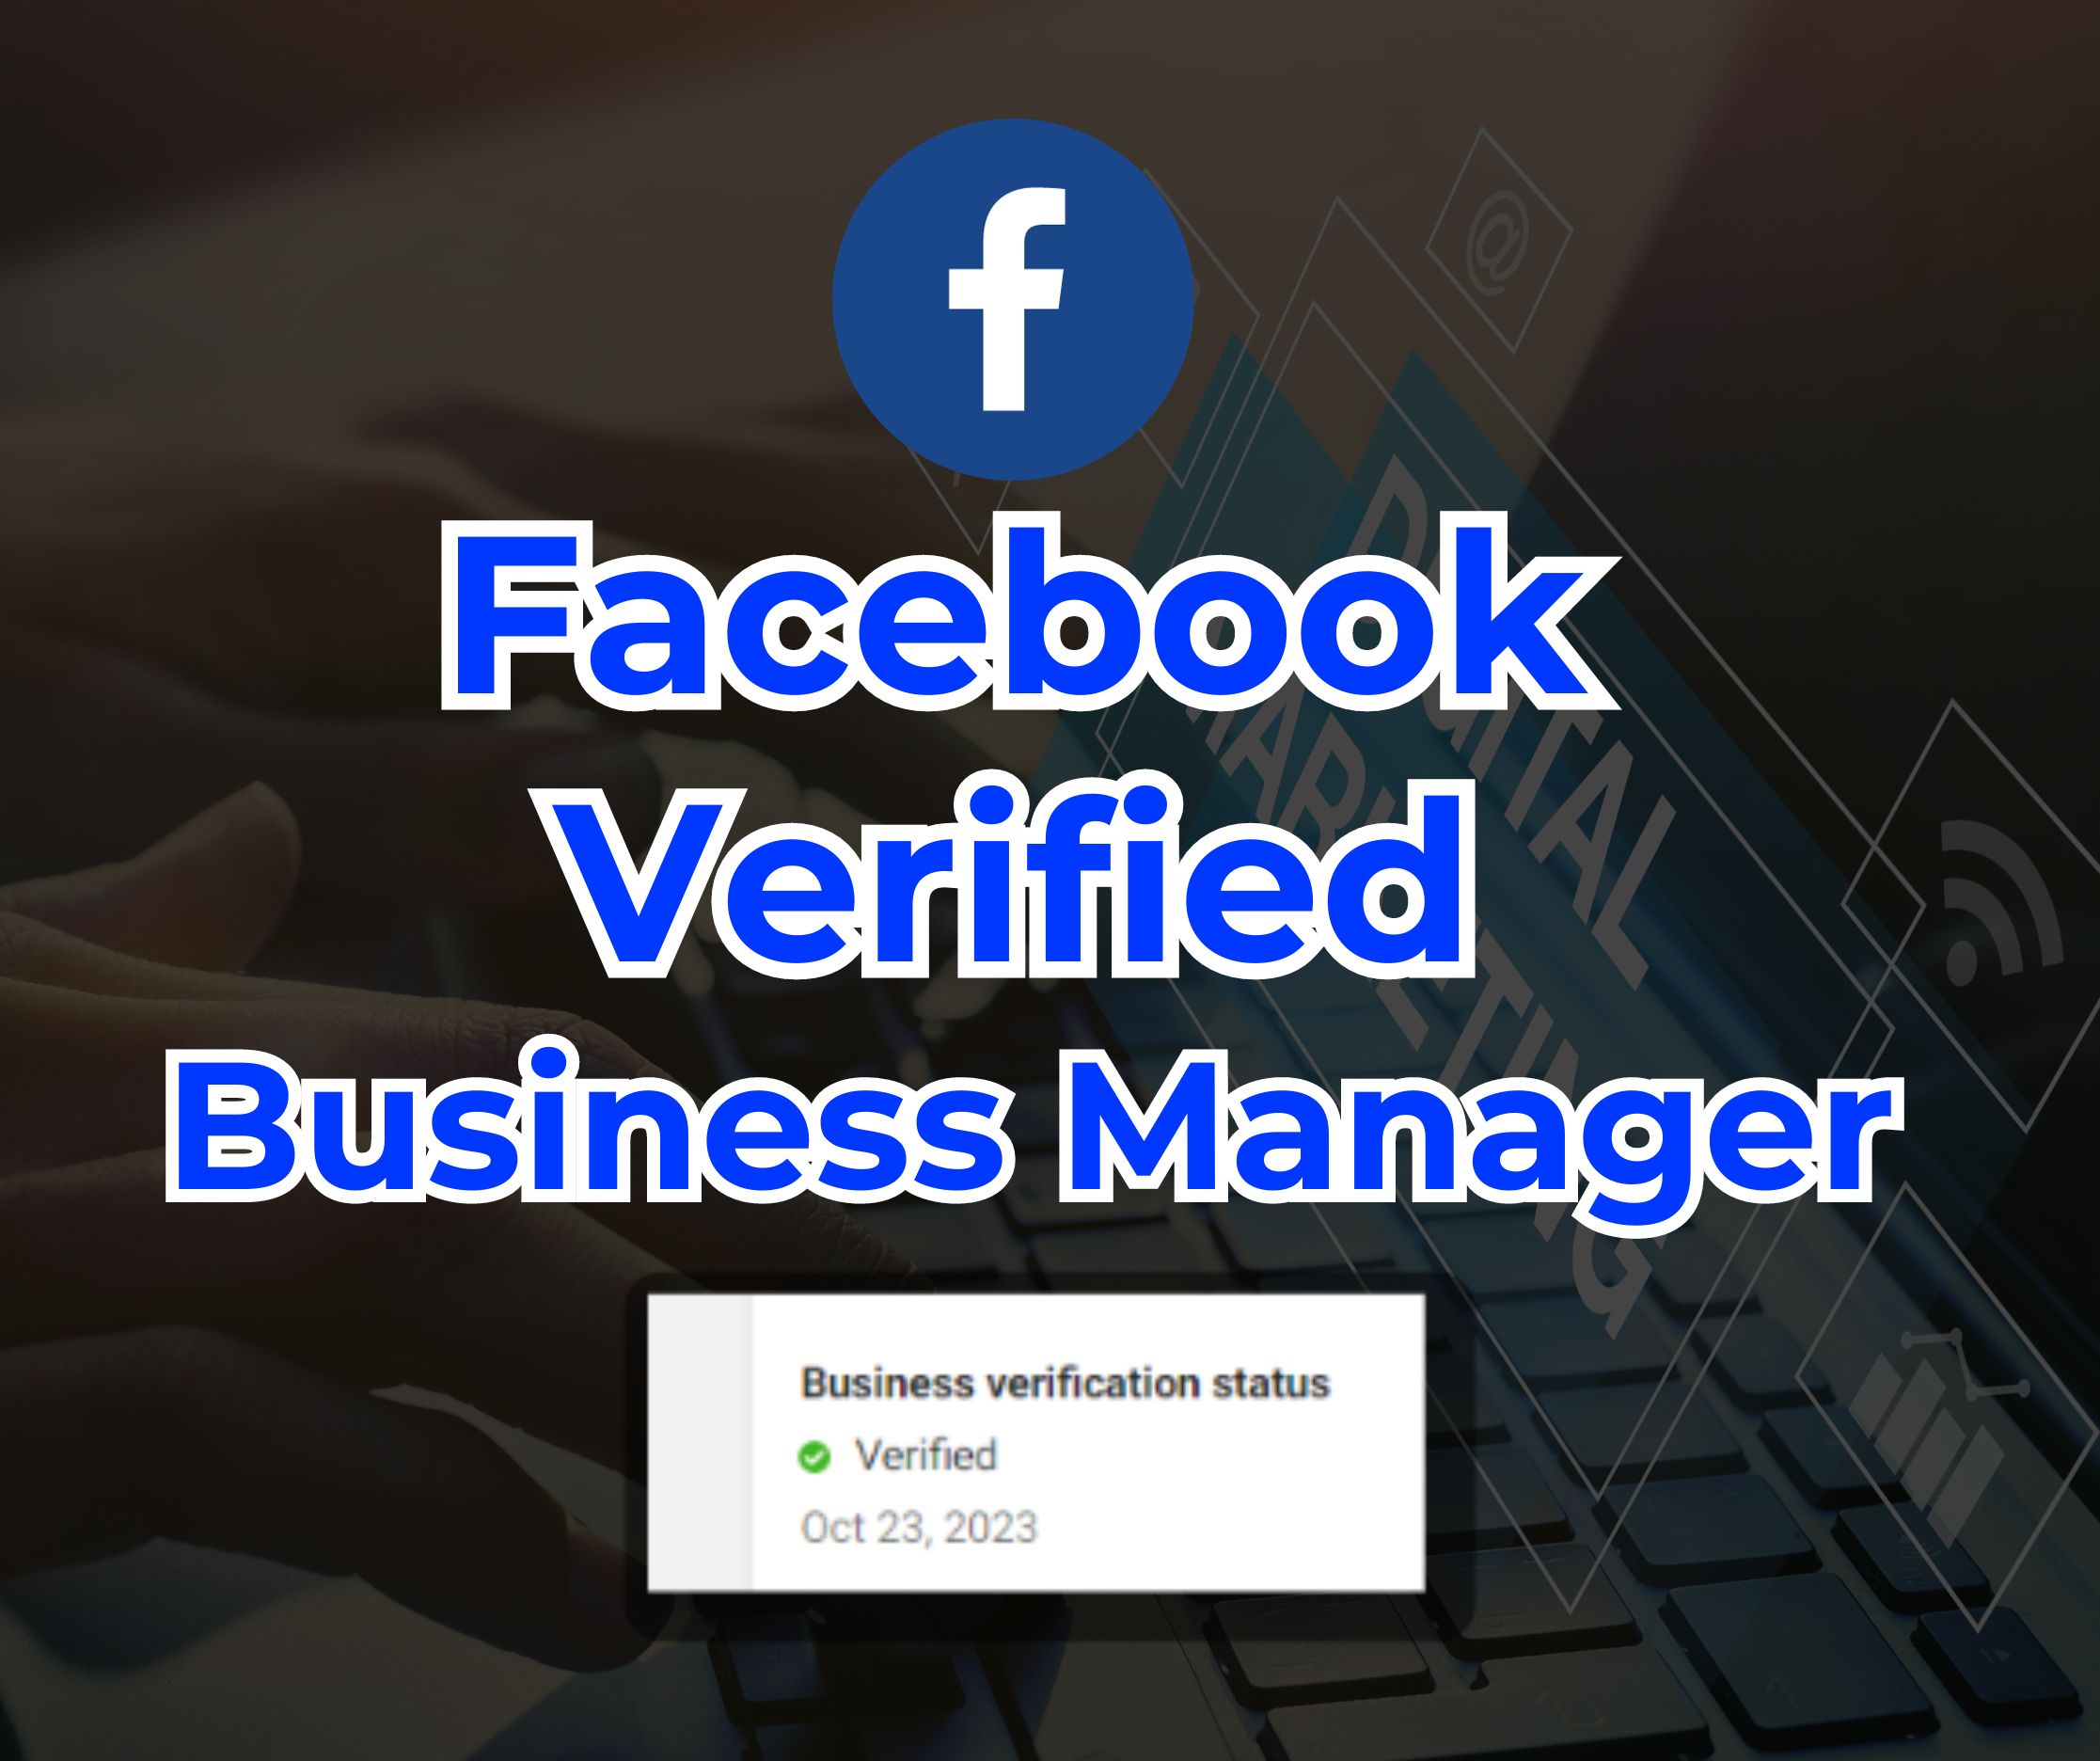 129044Facebook Verified Business Manager